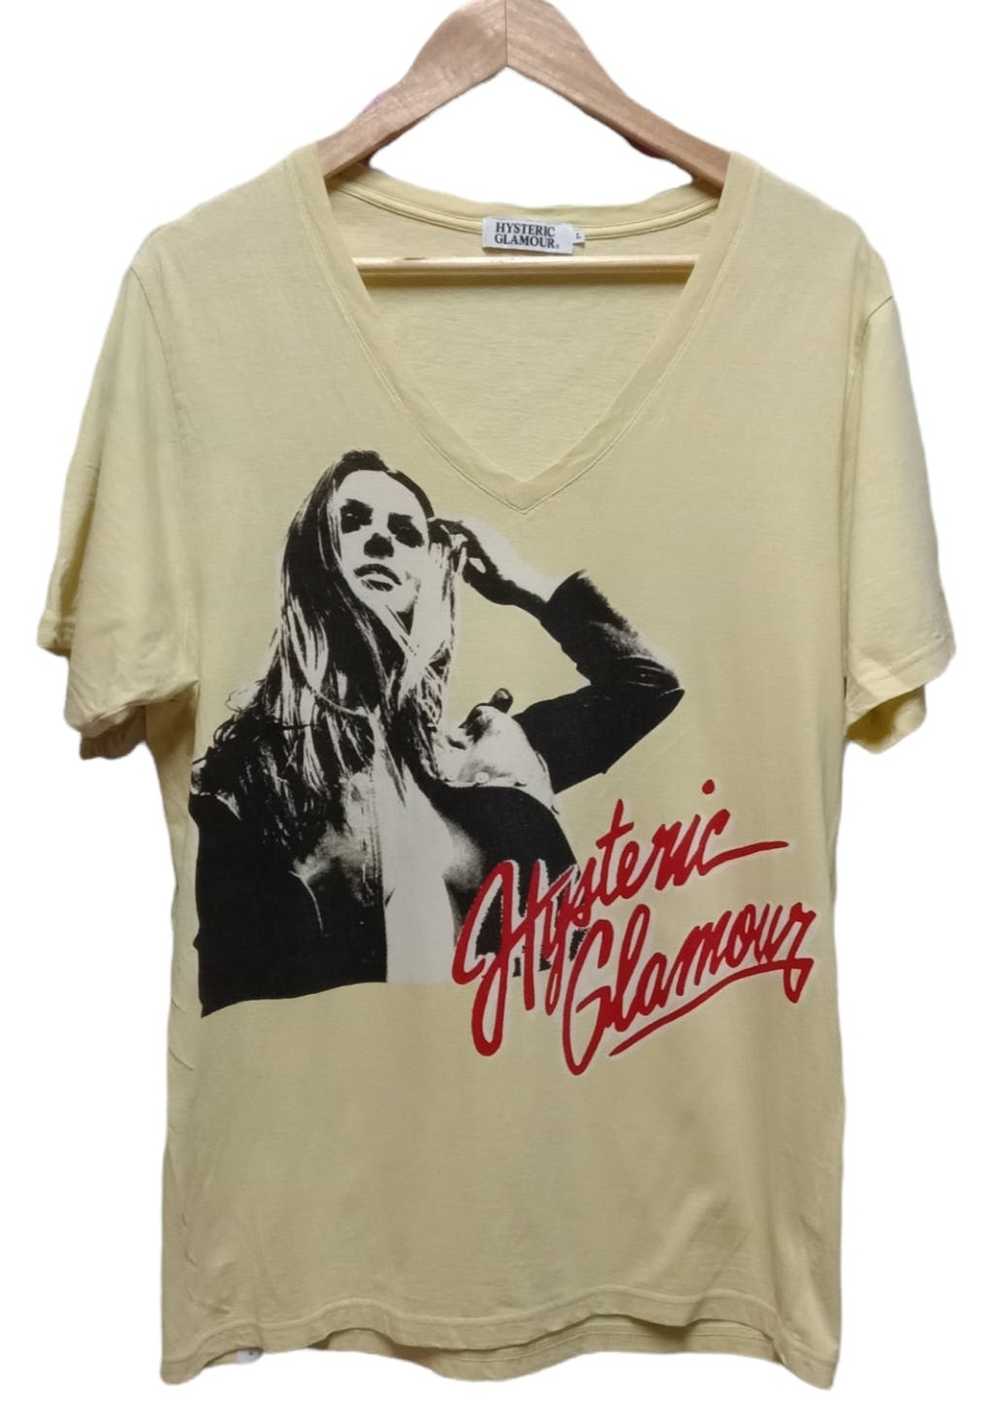 Band Tees × Hysteric Glamour Hysteric Glamour - image 1